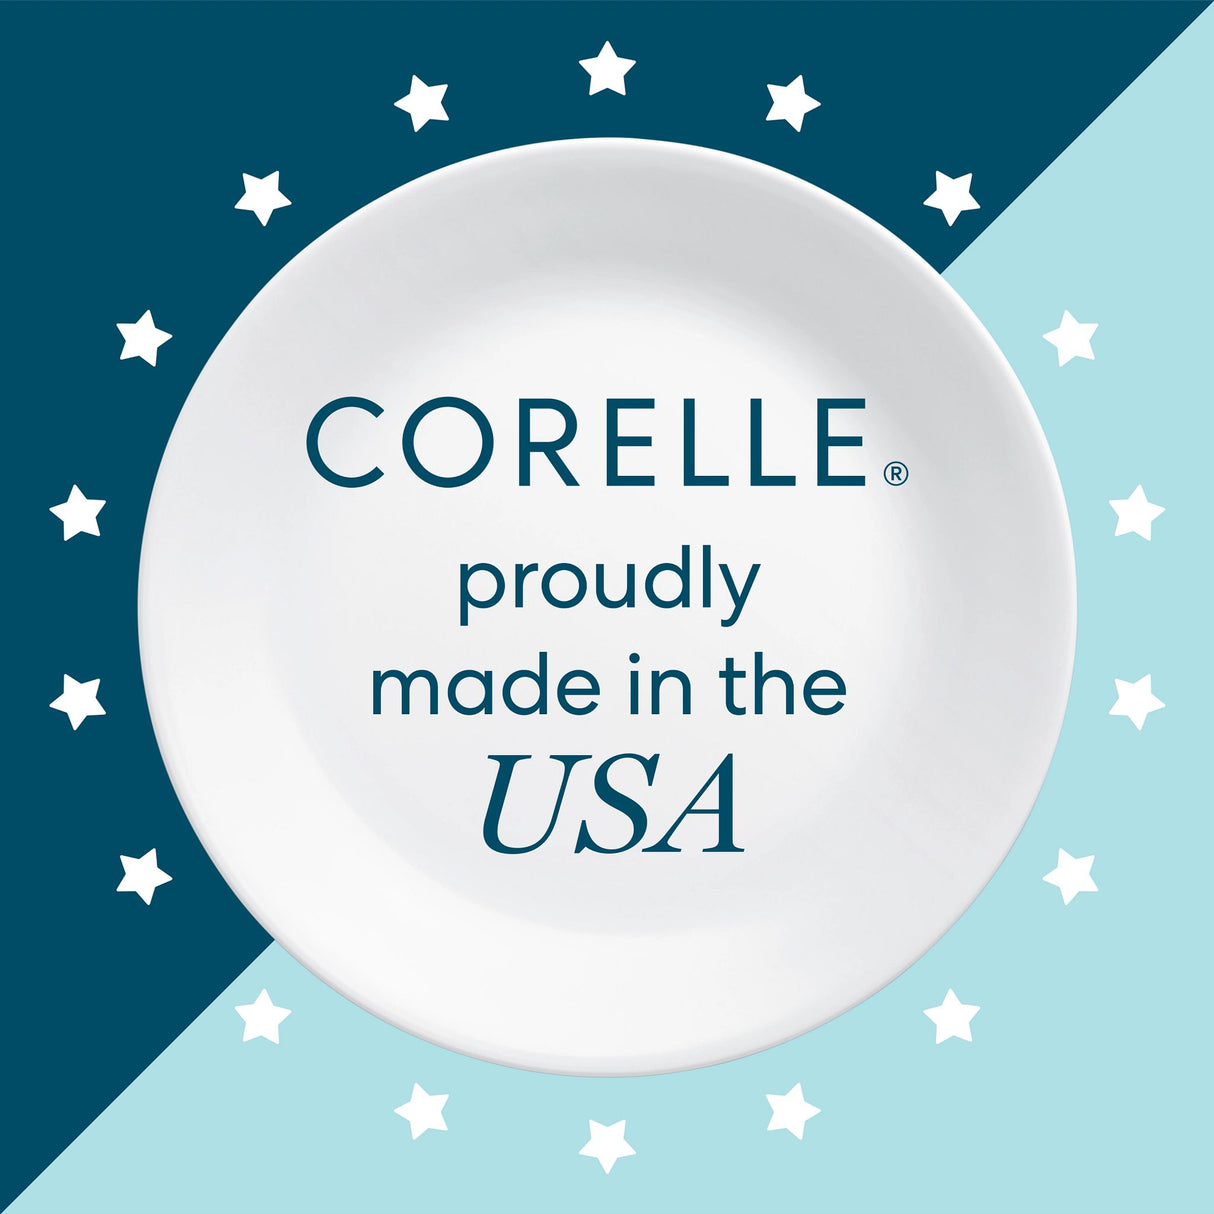  corelle proudly made in the USA text with white plates